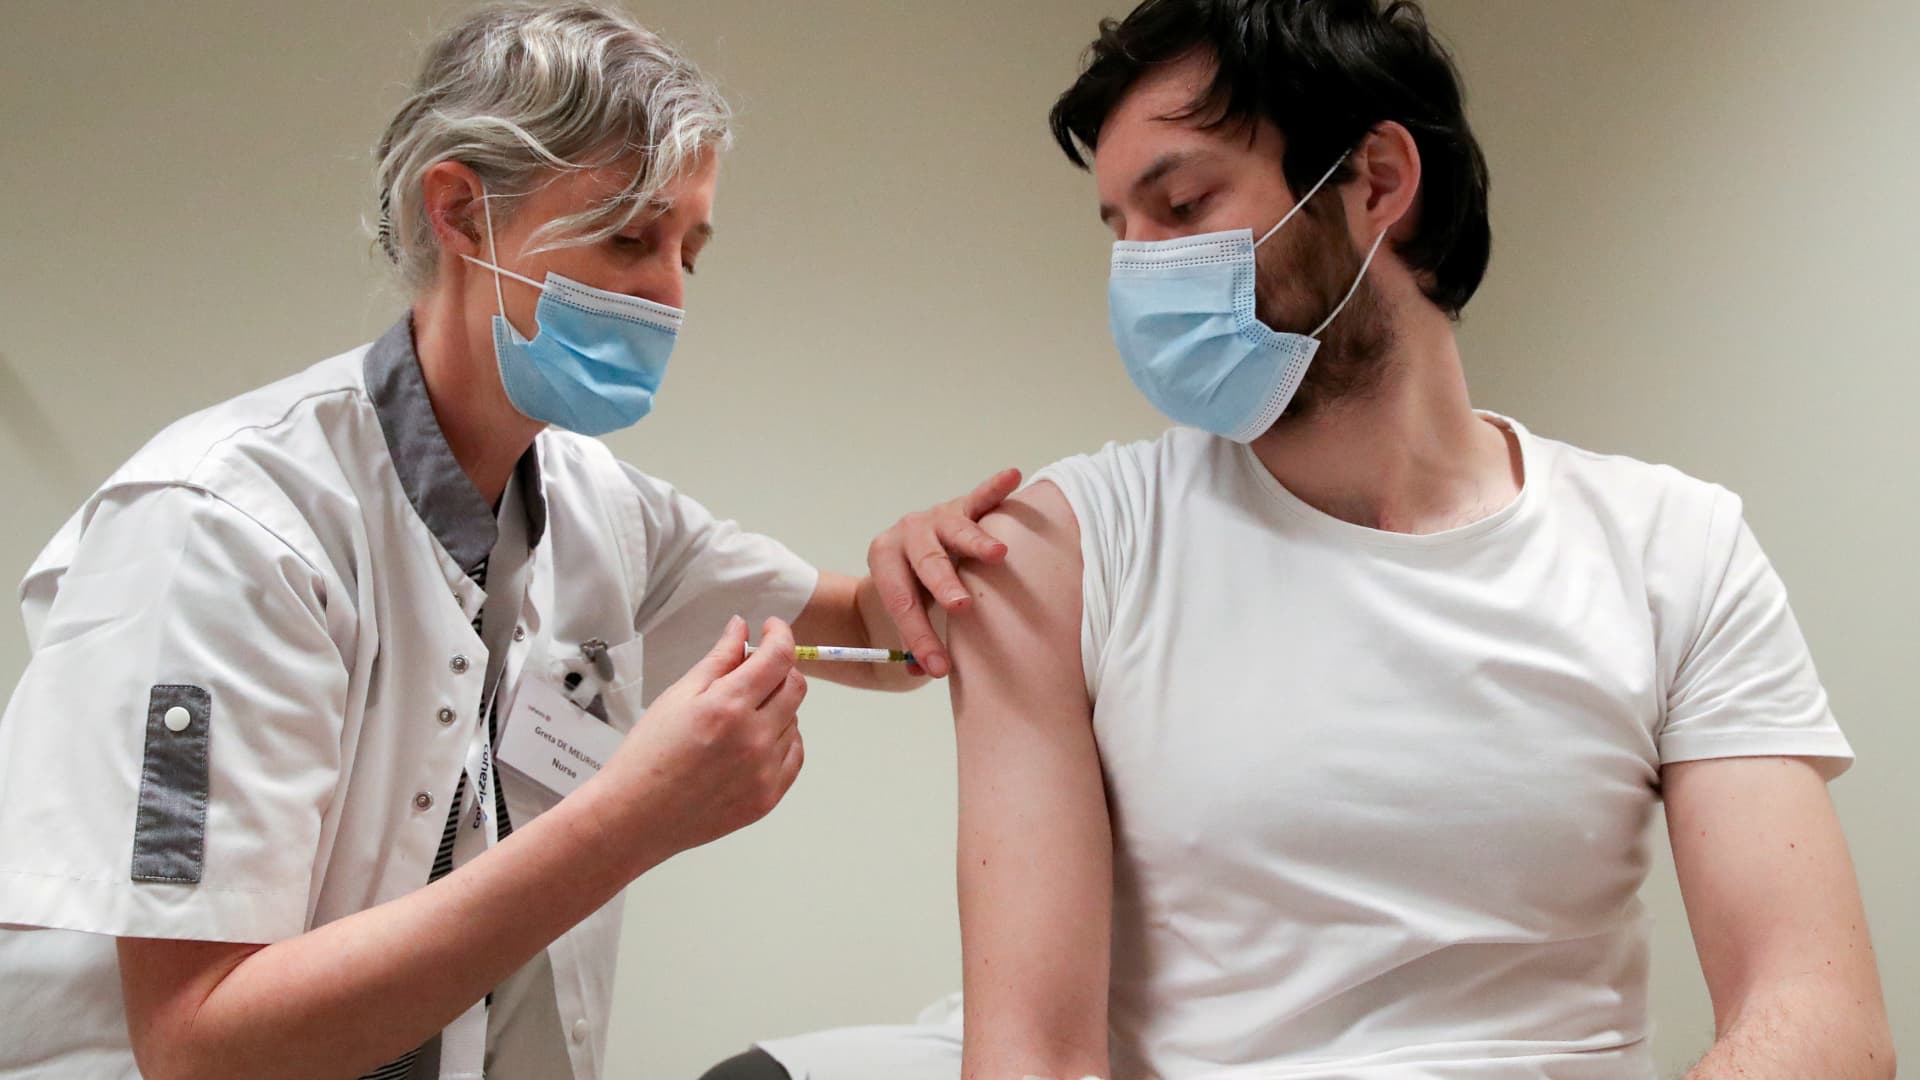 A volunteer receives a dose of CureVac vaccine or a placebo during a study by the German biotech firm CureVac as part of a testing for a new vaccine against the coronavirus disease (COVID-19), in Brussels, Belgium March 2, 2021.